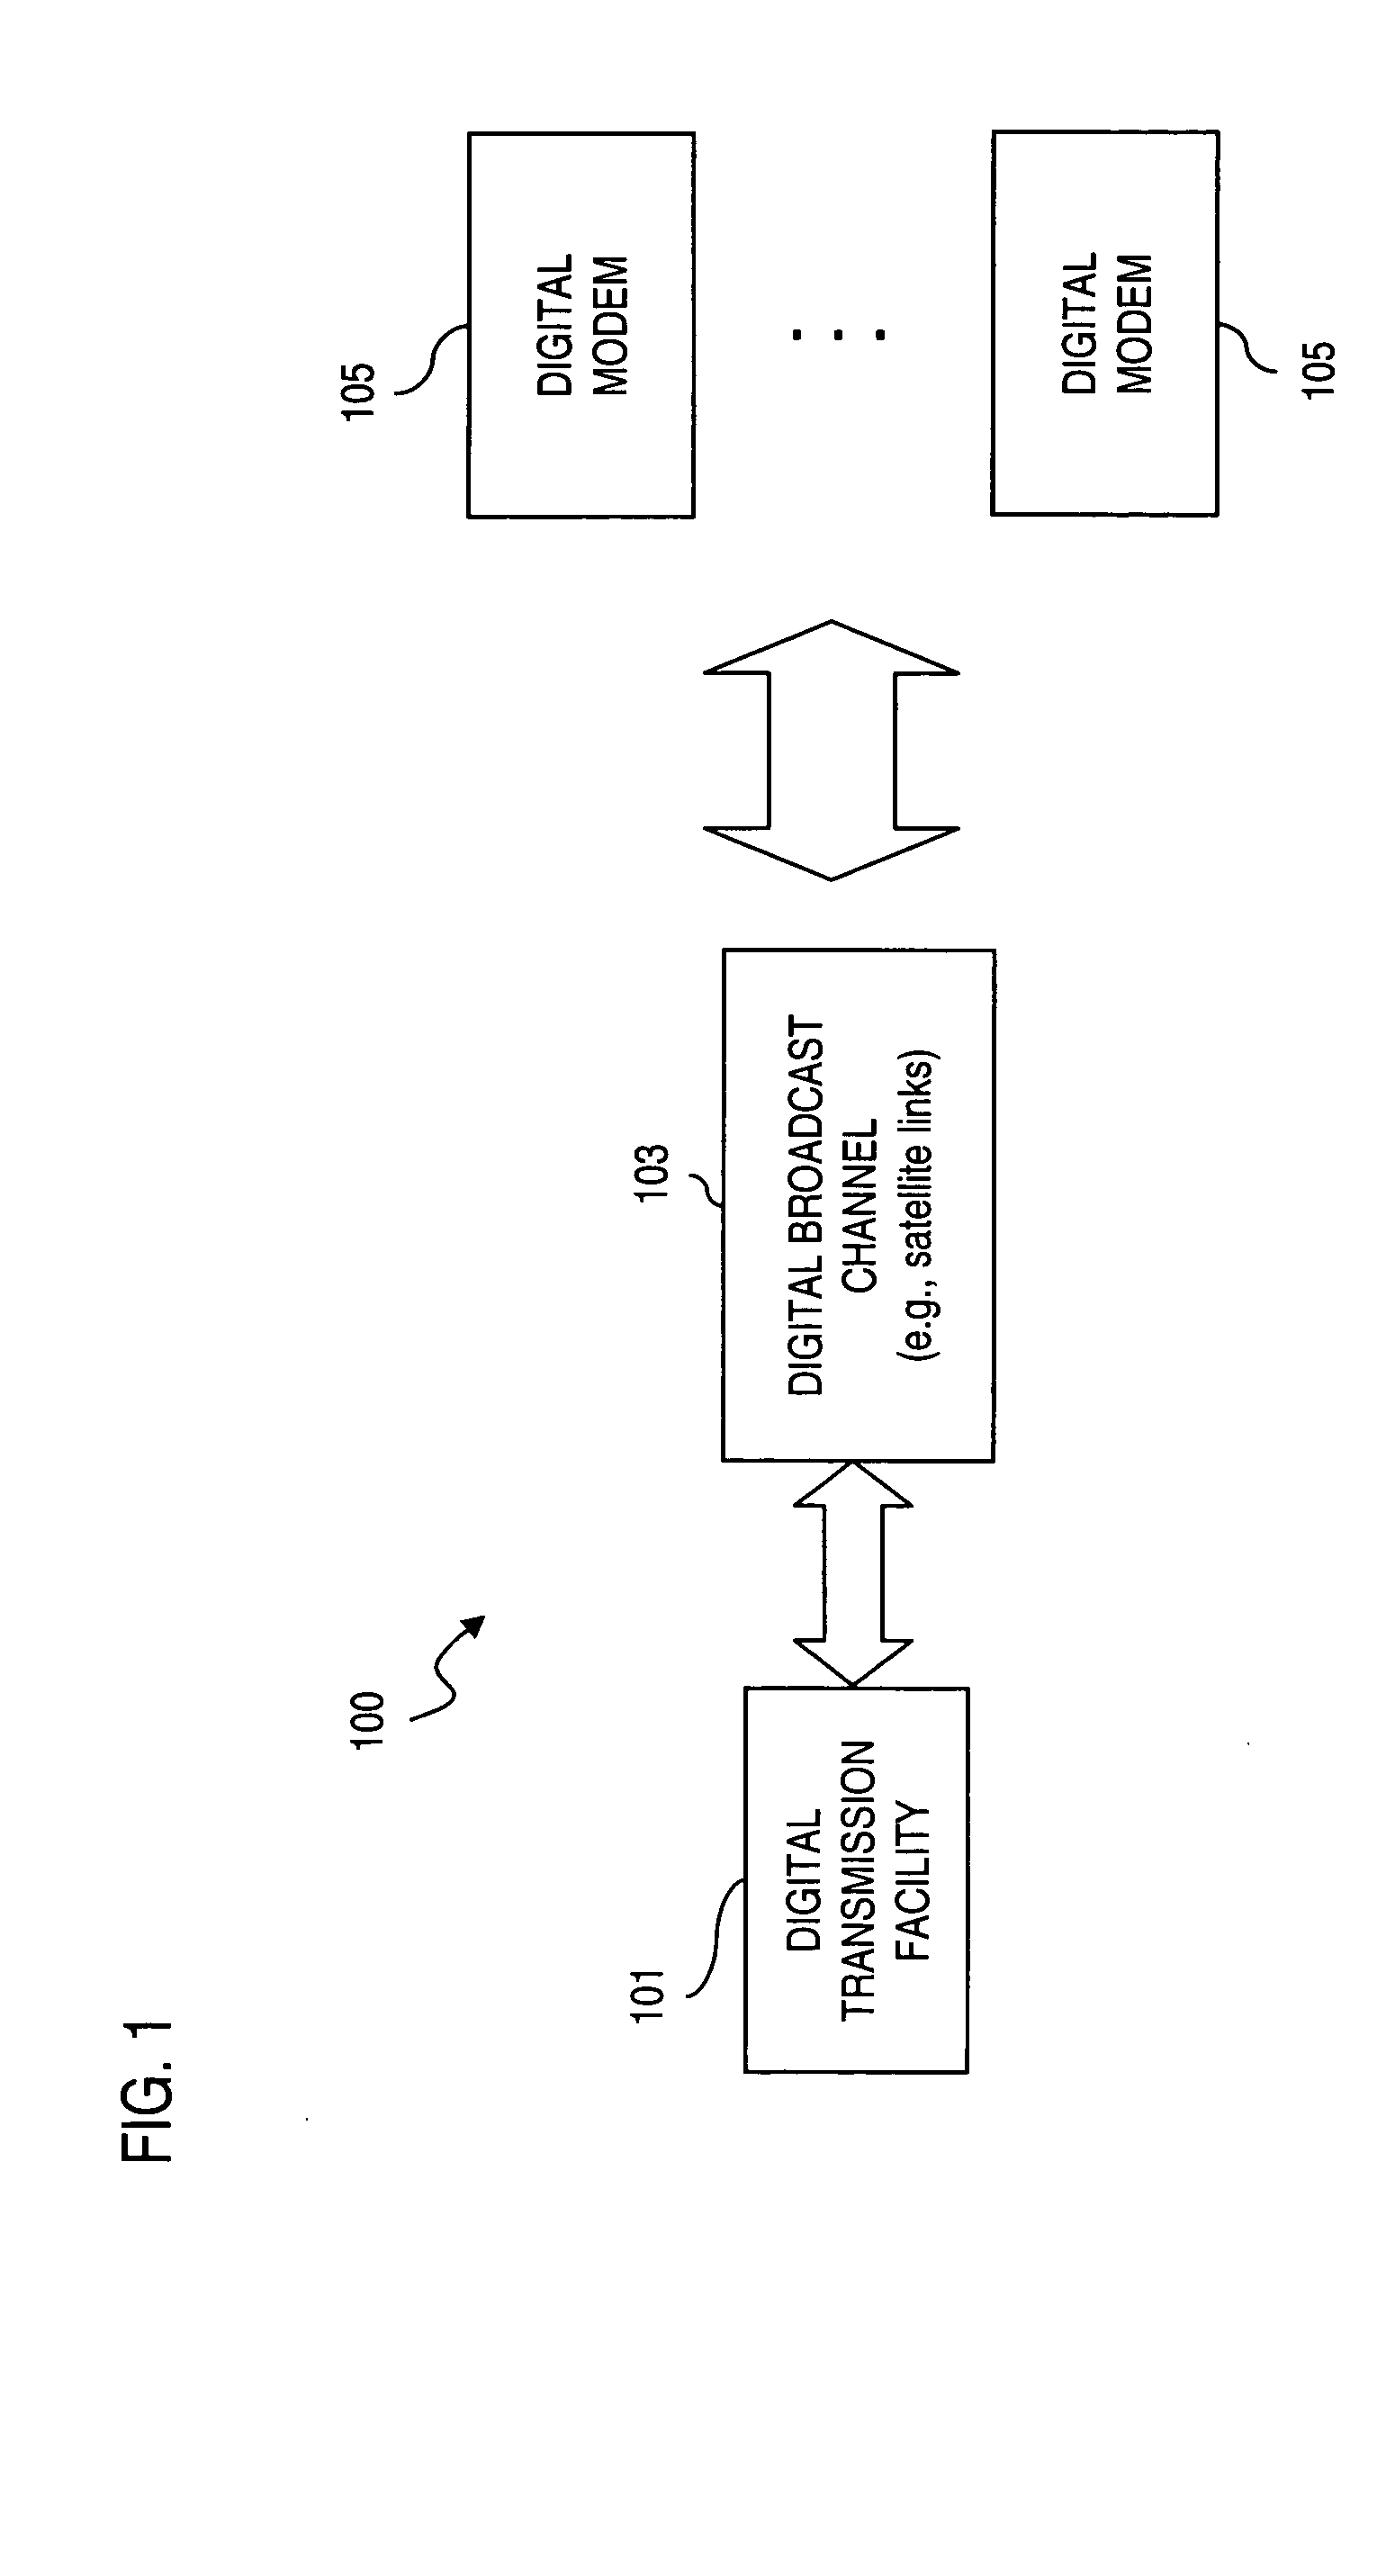 Method and apparatus for providing signal acquisition and frame synchronization in a hierarchical modulation scheme